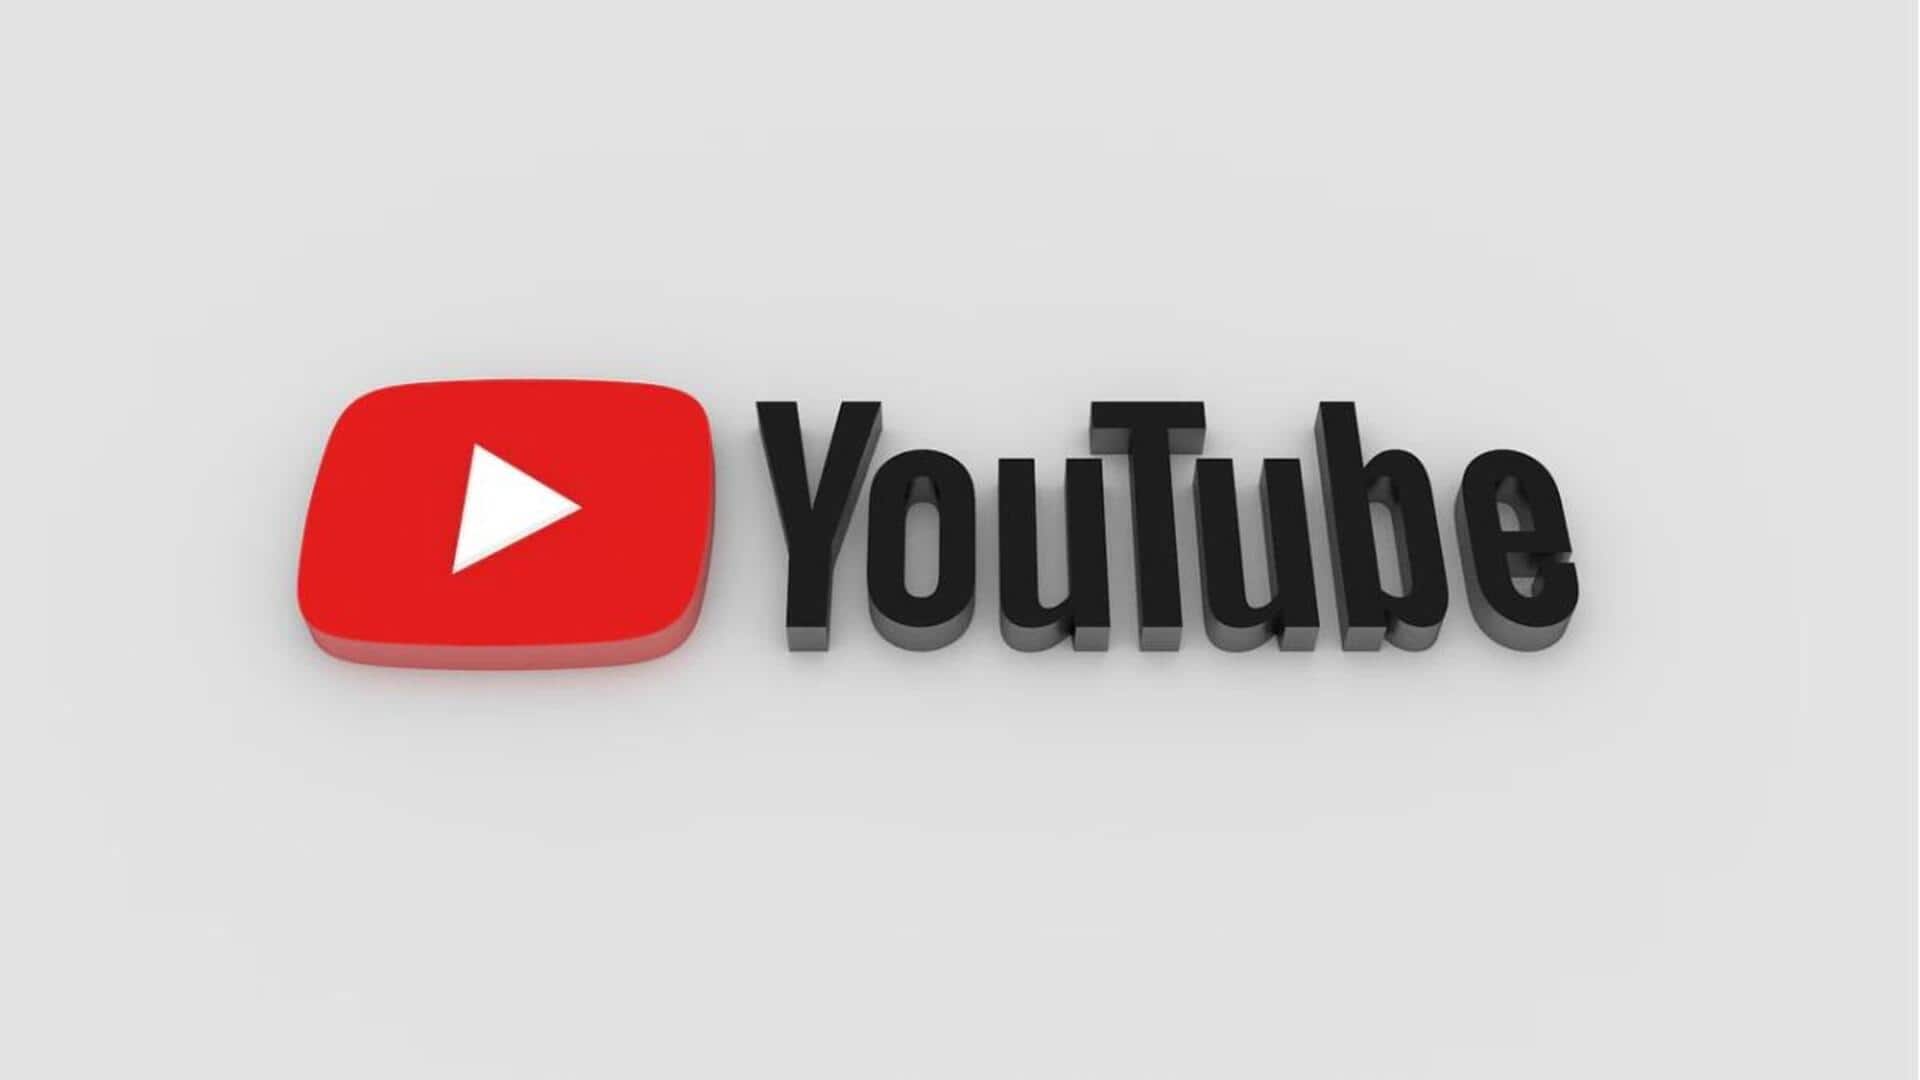 YouTube tests new 'You' tab, replacing 'Library' section